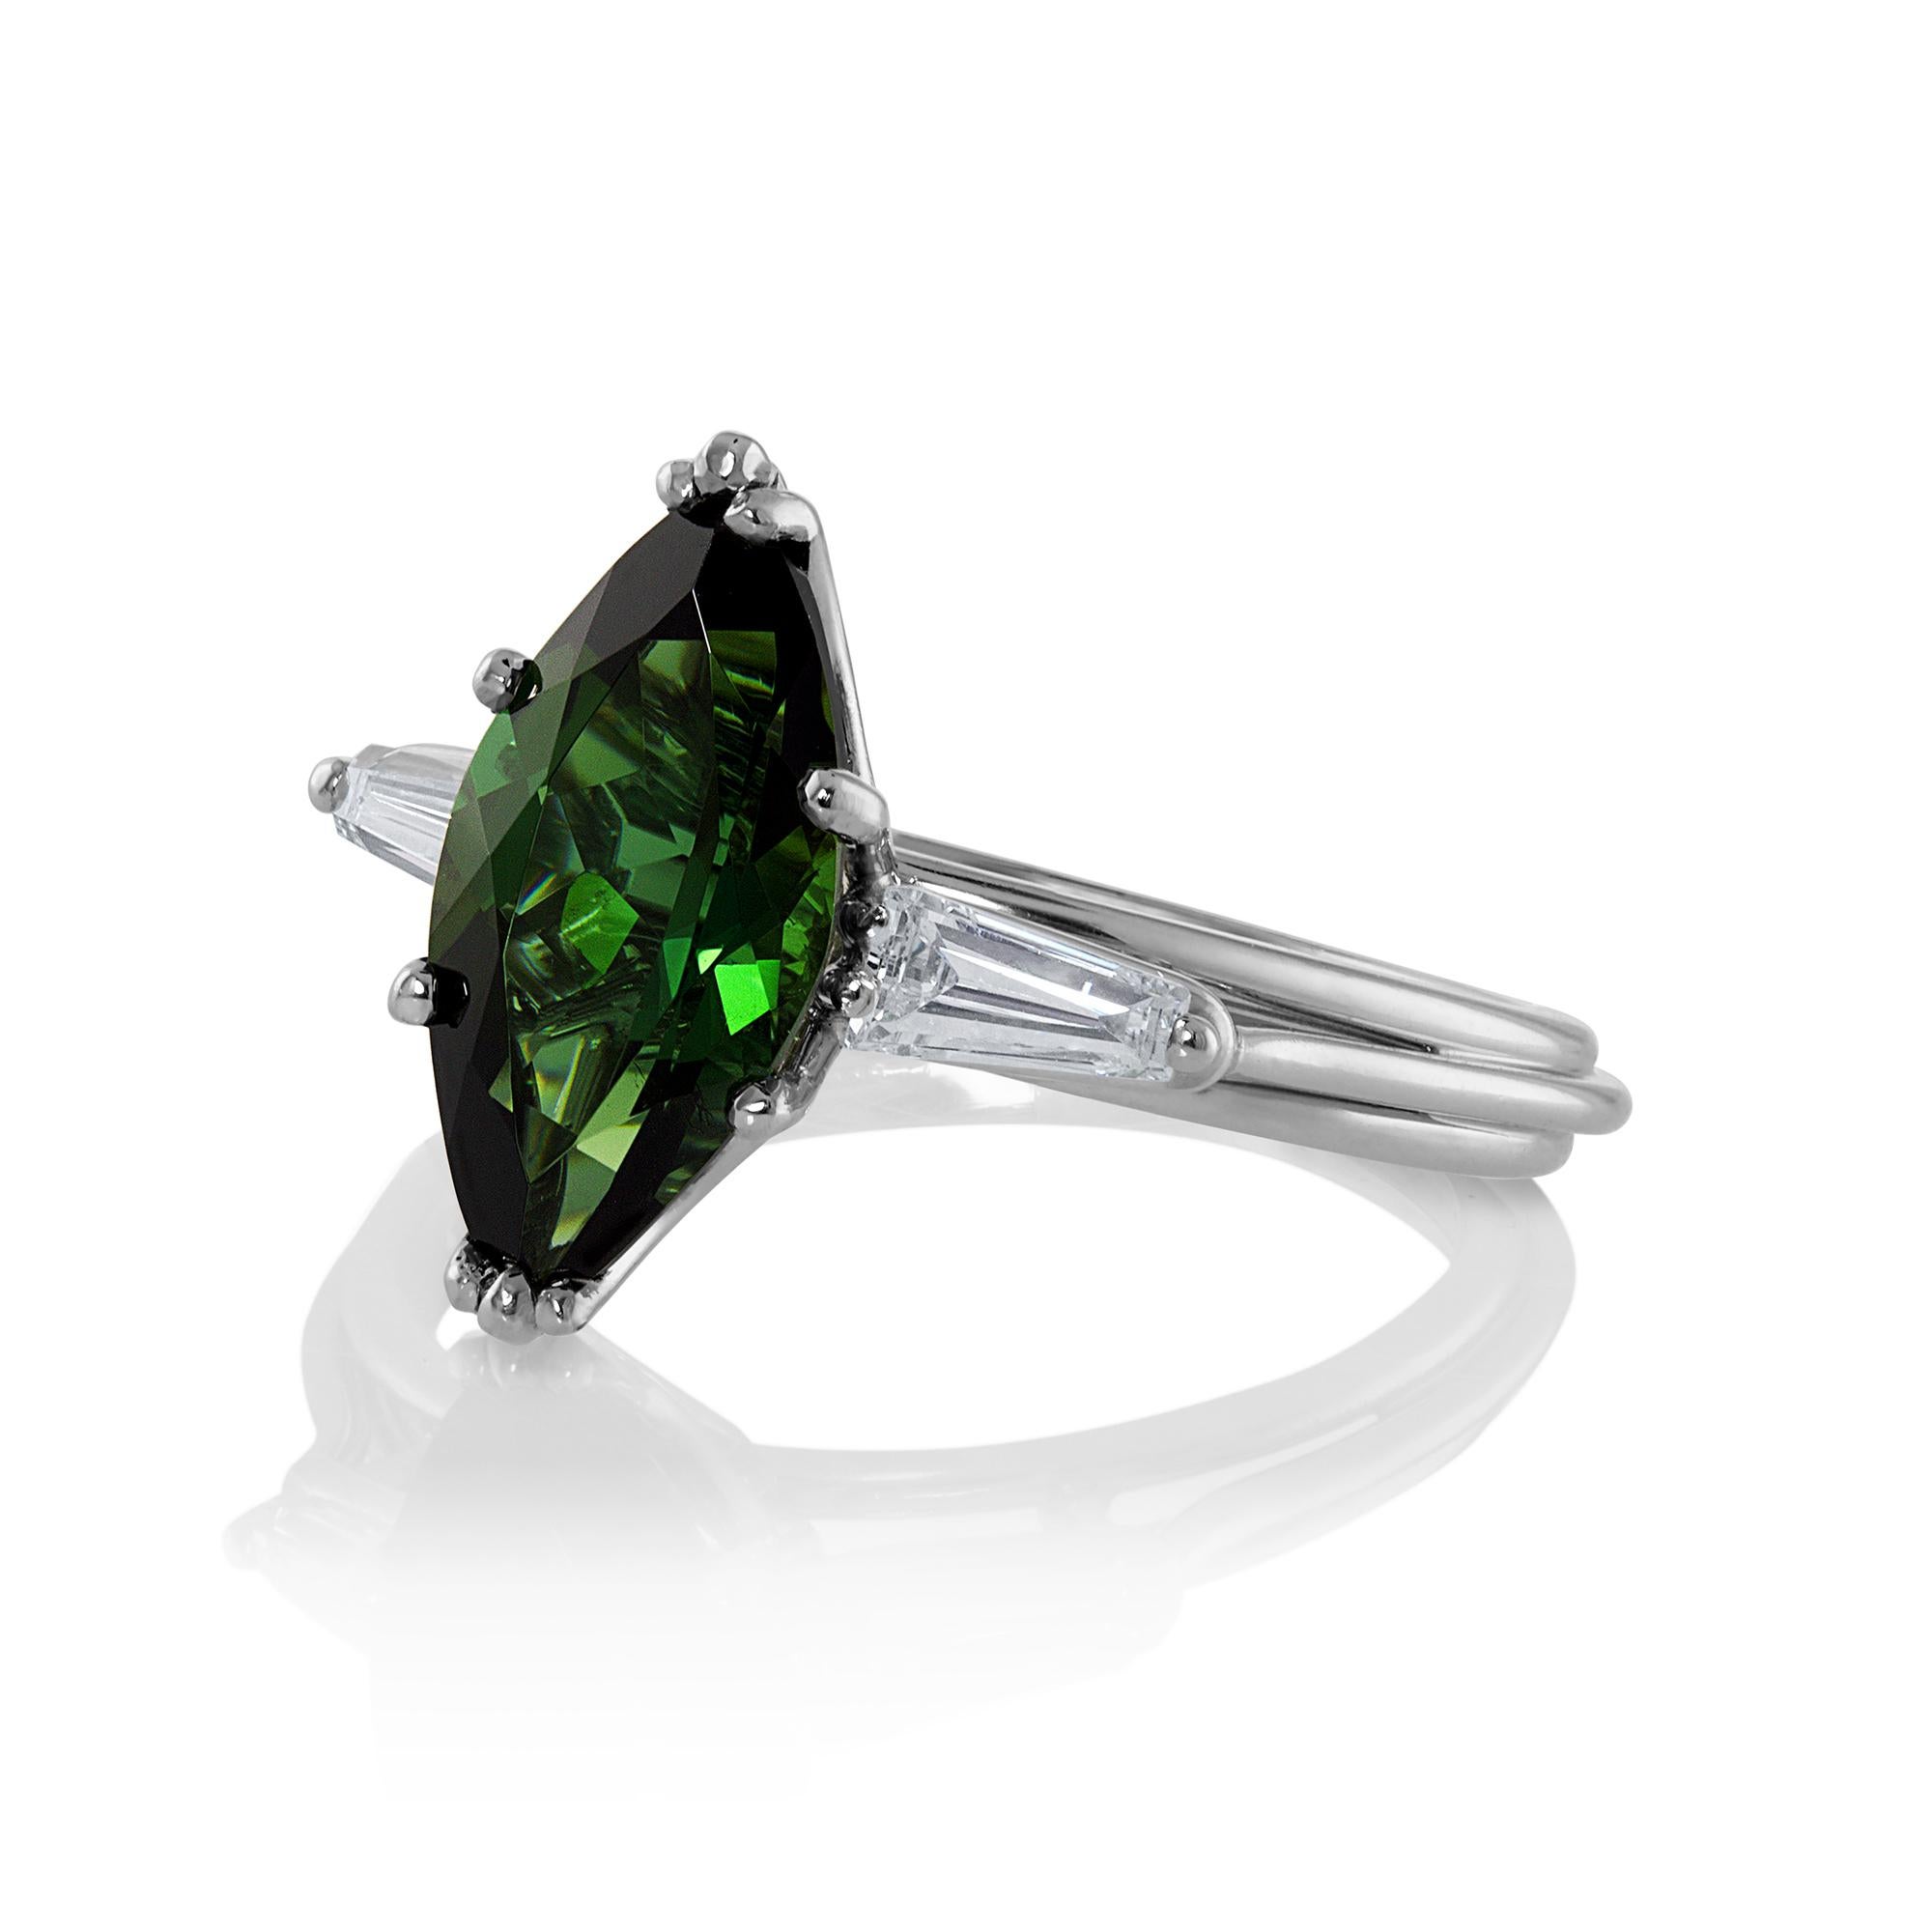 Late Art Deco, Iconic style of the 3 Stone Green Tourmaline and Diamond engagement ring, Circa 1930s-1940s. This Amazing Ring can be worn as an Engagement ring, Wedding, Anniversary or as a right hand ring! A knock-out!
A Breathtaking Vintage